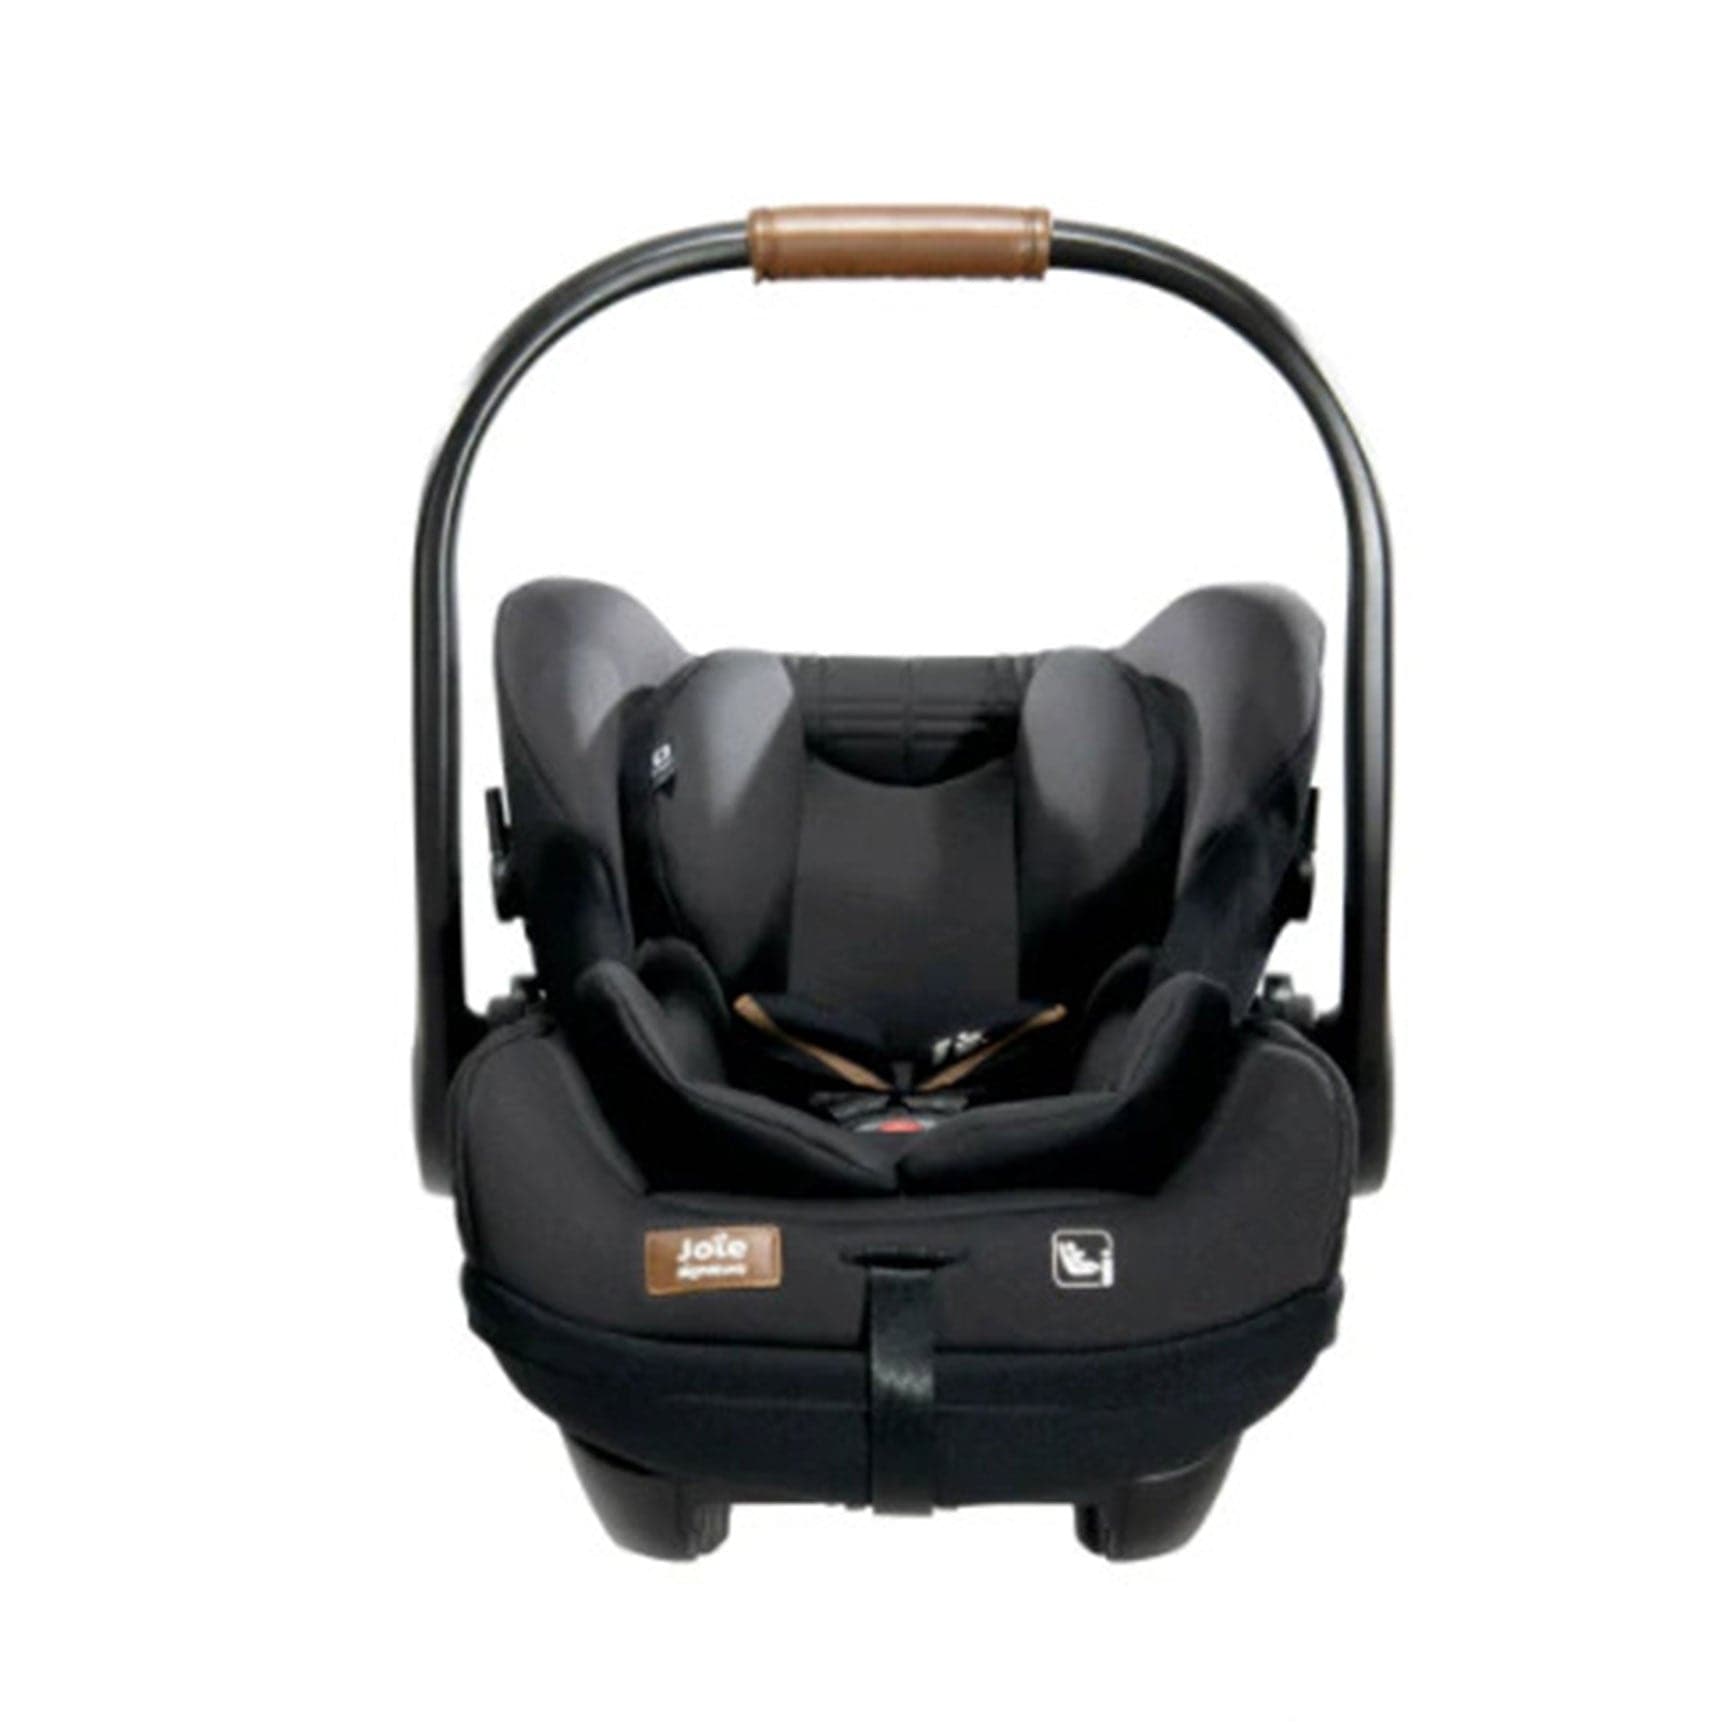 Joie baby car seats Joie i-Level Recline Signature Car Seat - Eclipse C1510GAECL000